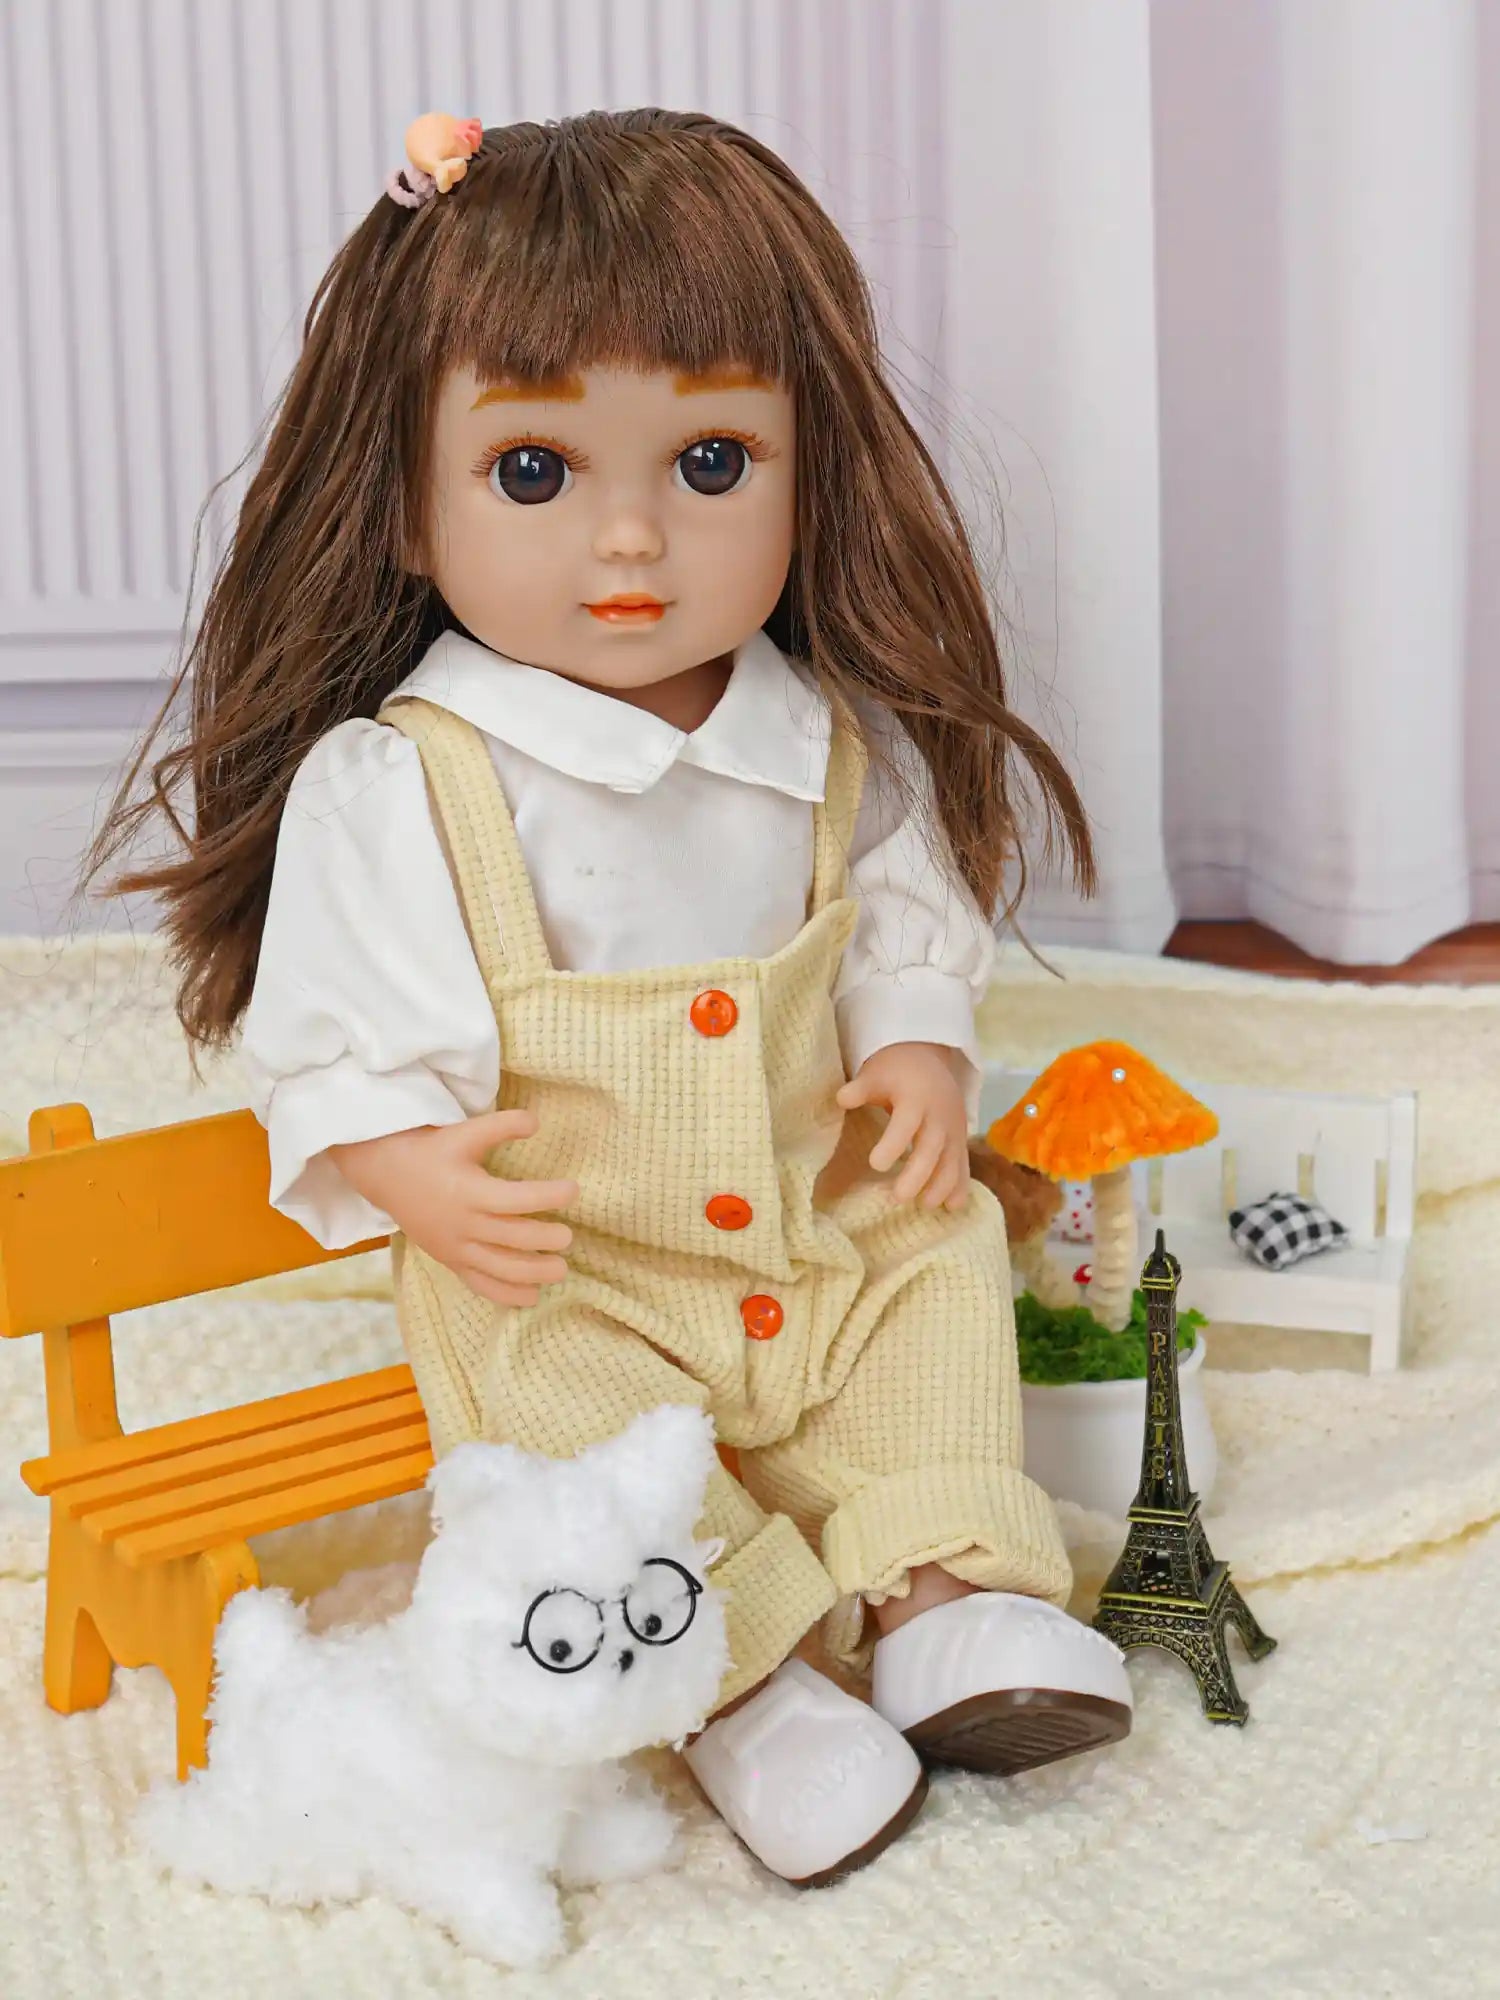 Doll with toy dog wearing glasses and a tiny Eiffel Tower nearby.